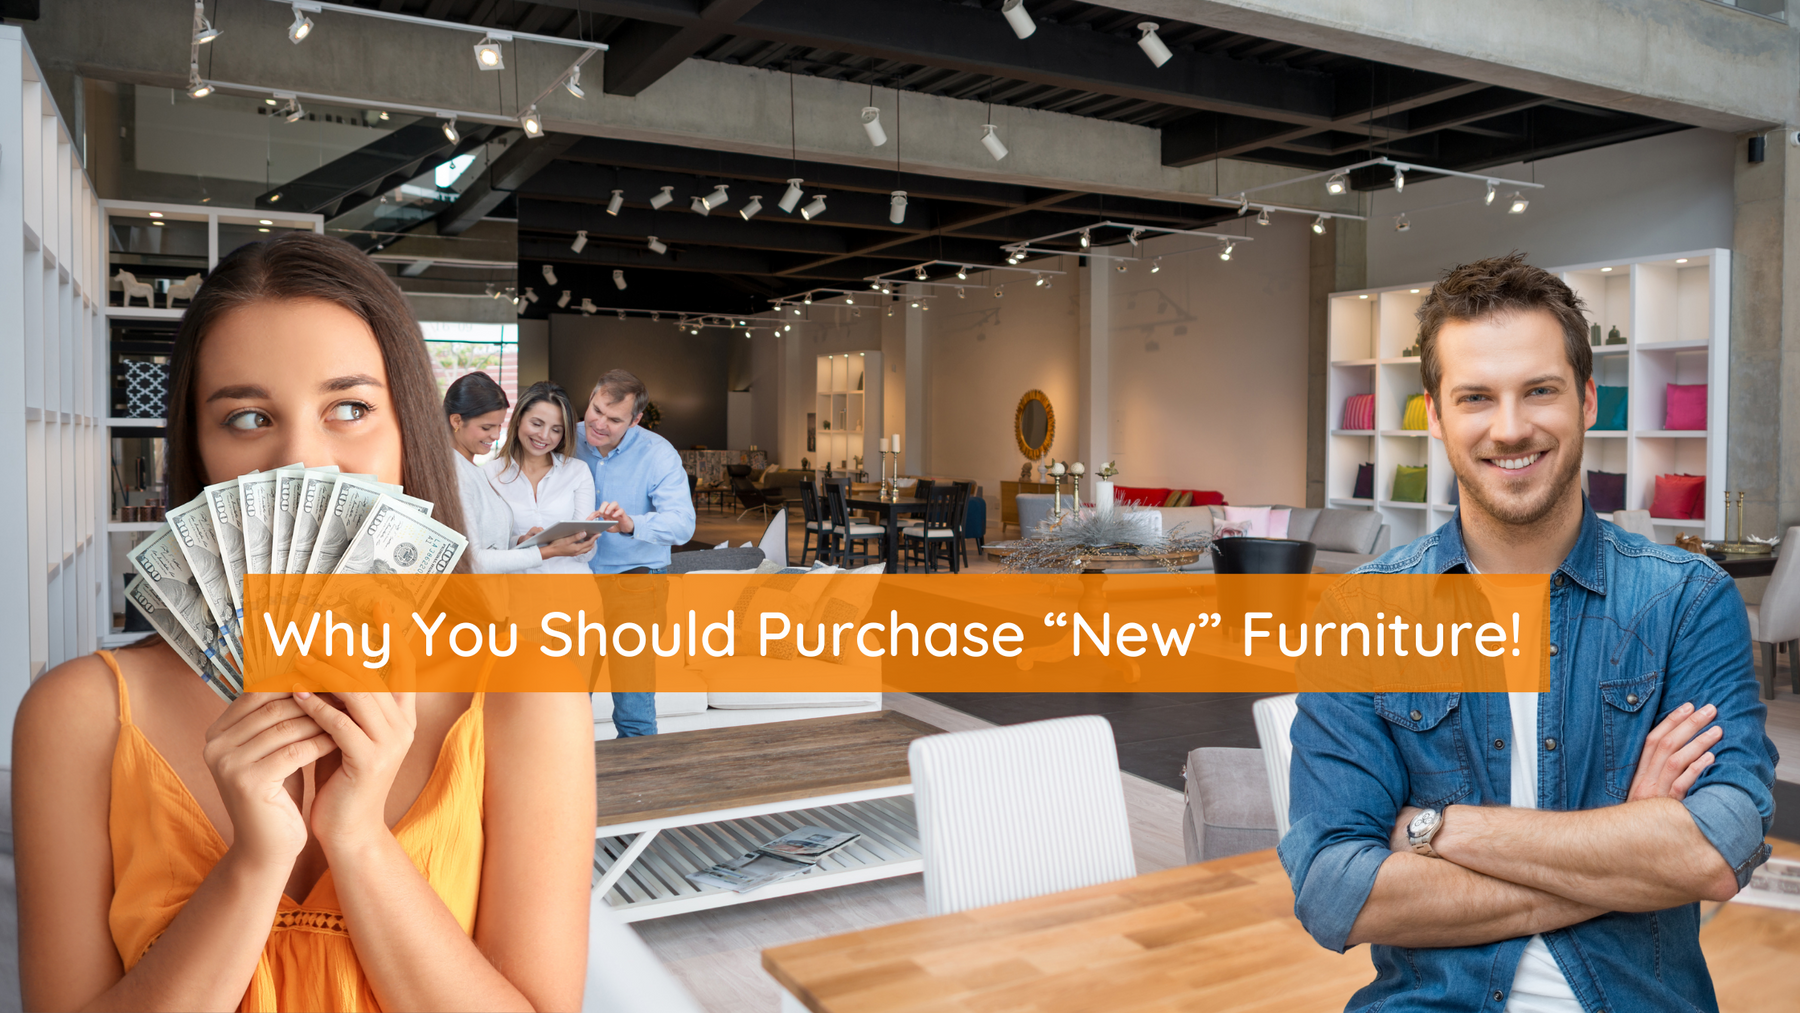 Why You Should Purchase “New” Furniture!